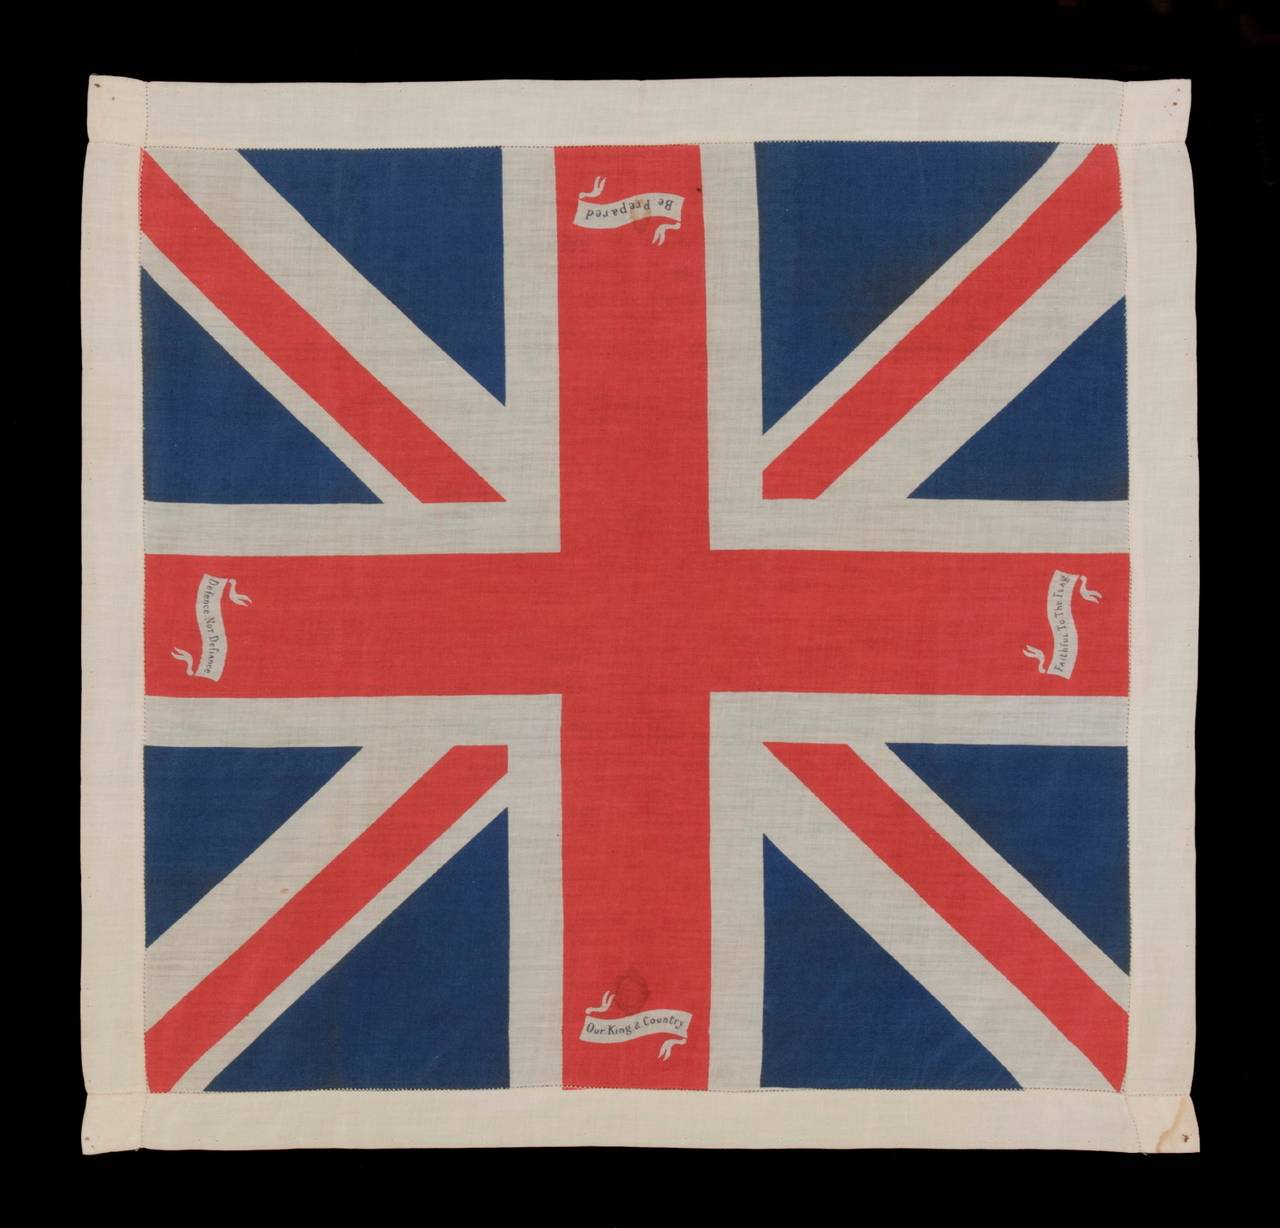 BRITISH UNION JACK KERCHIEF, PRINTED ON SILK, WITH PATRIOTIC SLOGANS, WWI ERA (1914-18):

Printed silk kerchief, in the form of the British Union Jack, decorated with small white scrolls at the base of each arm of the St George's Cross, each of